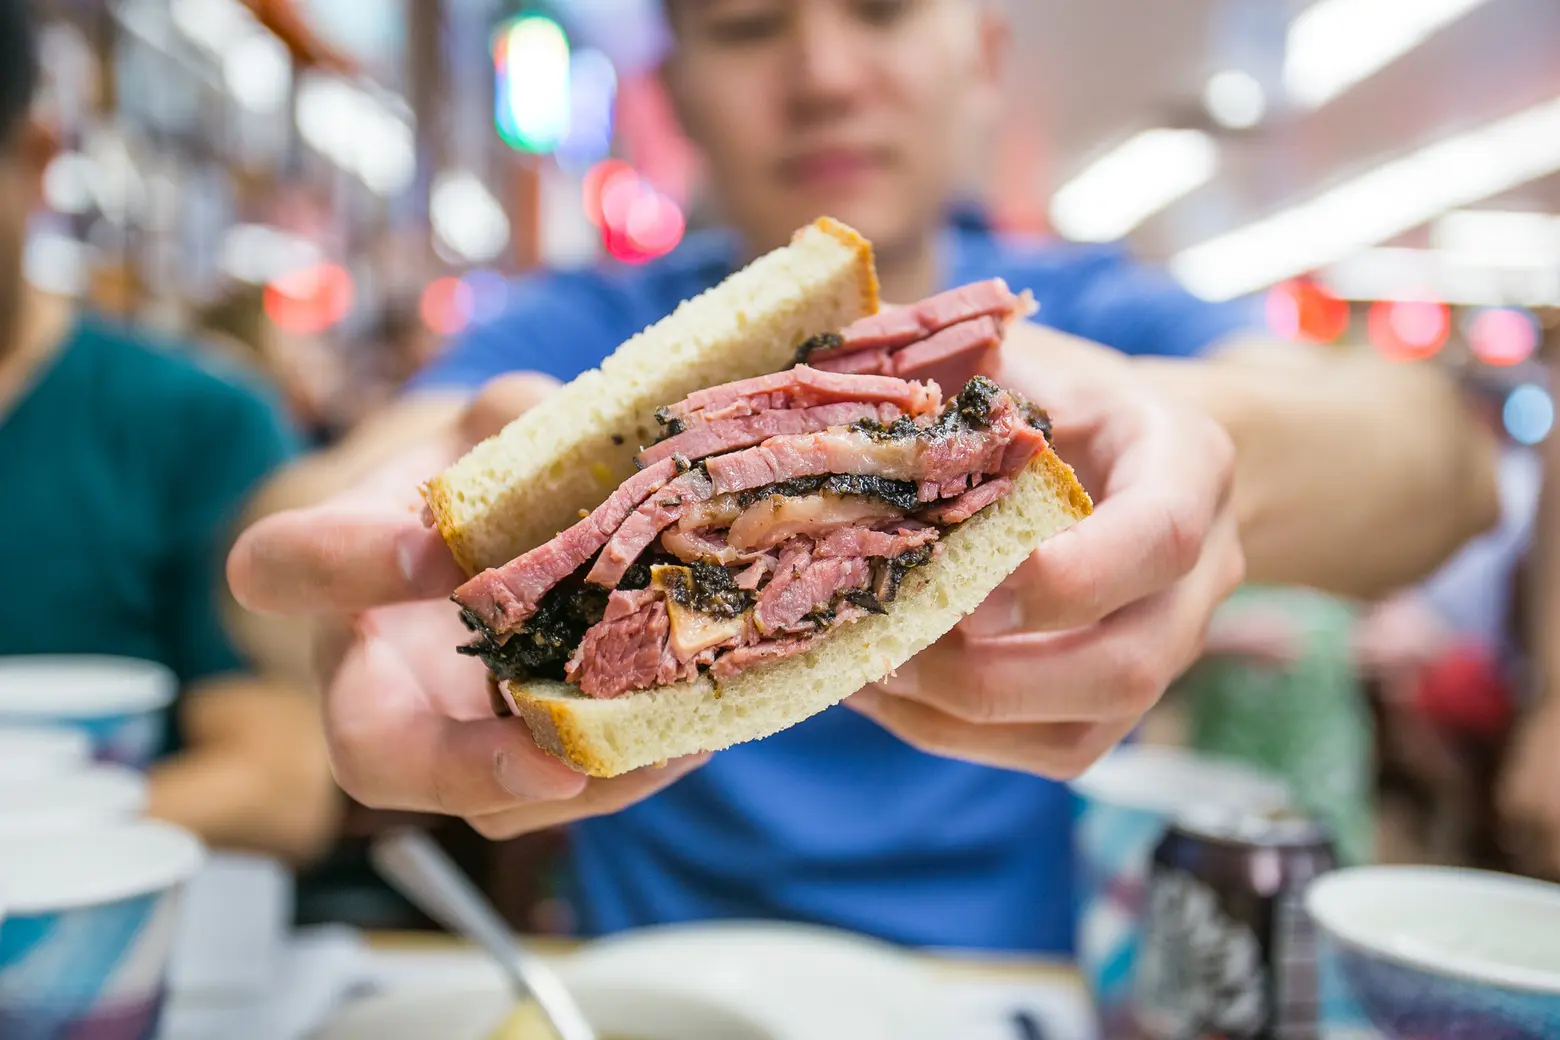 Katz’s iconic deli fare pops up at The Met this month